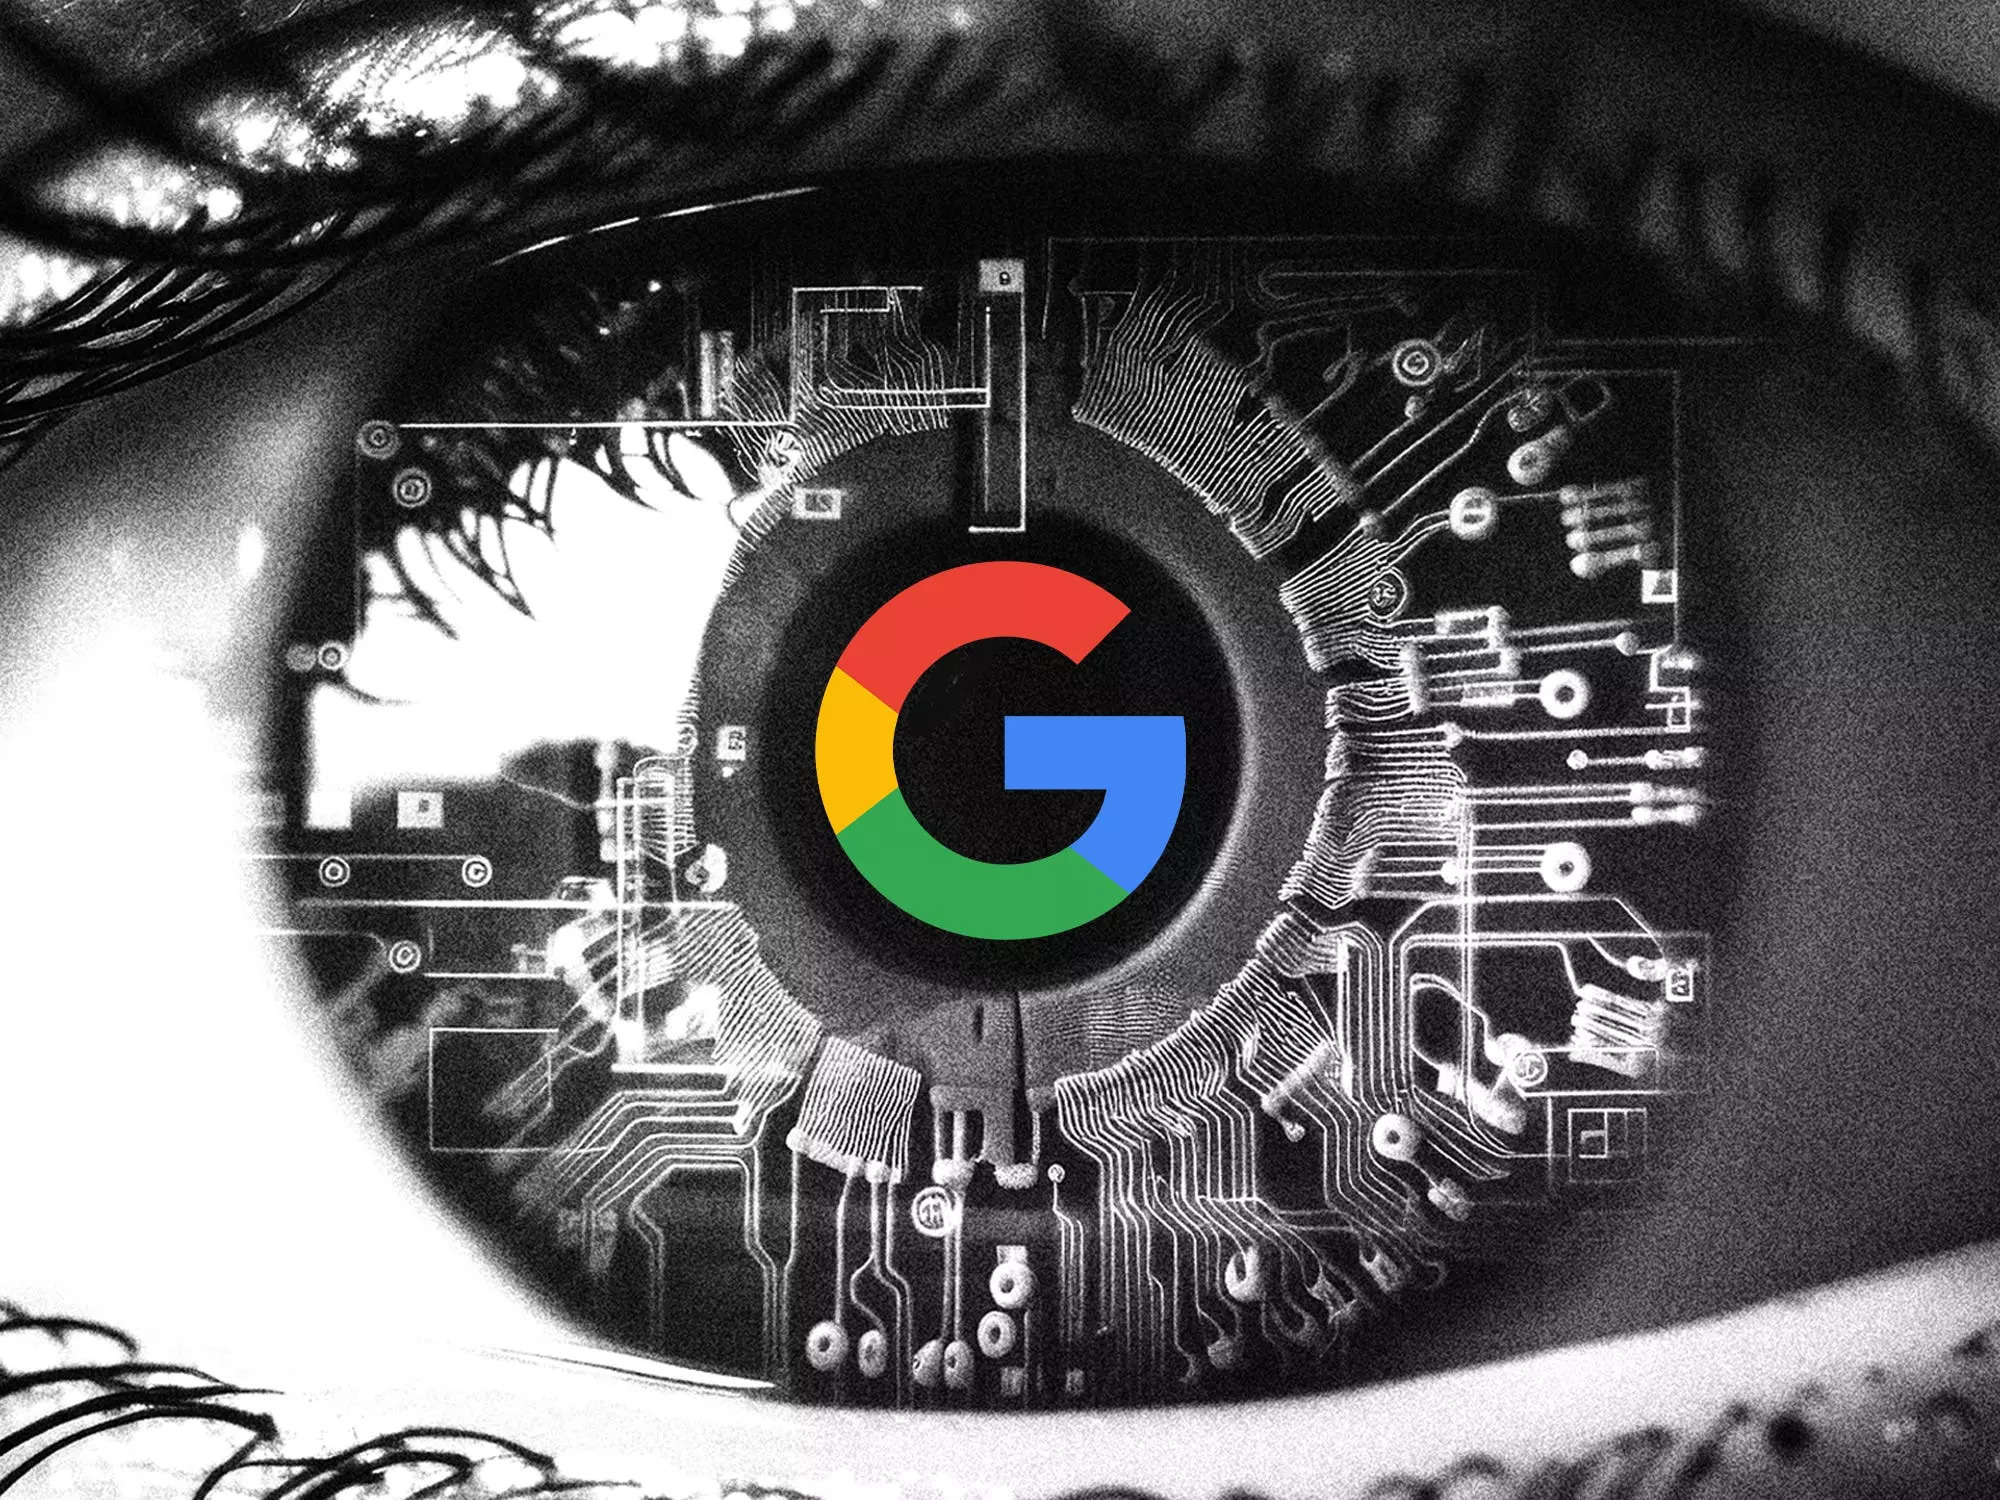 An eye with the Google logo in the iris